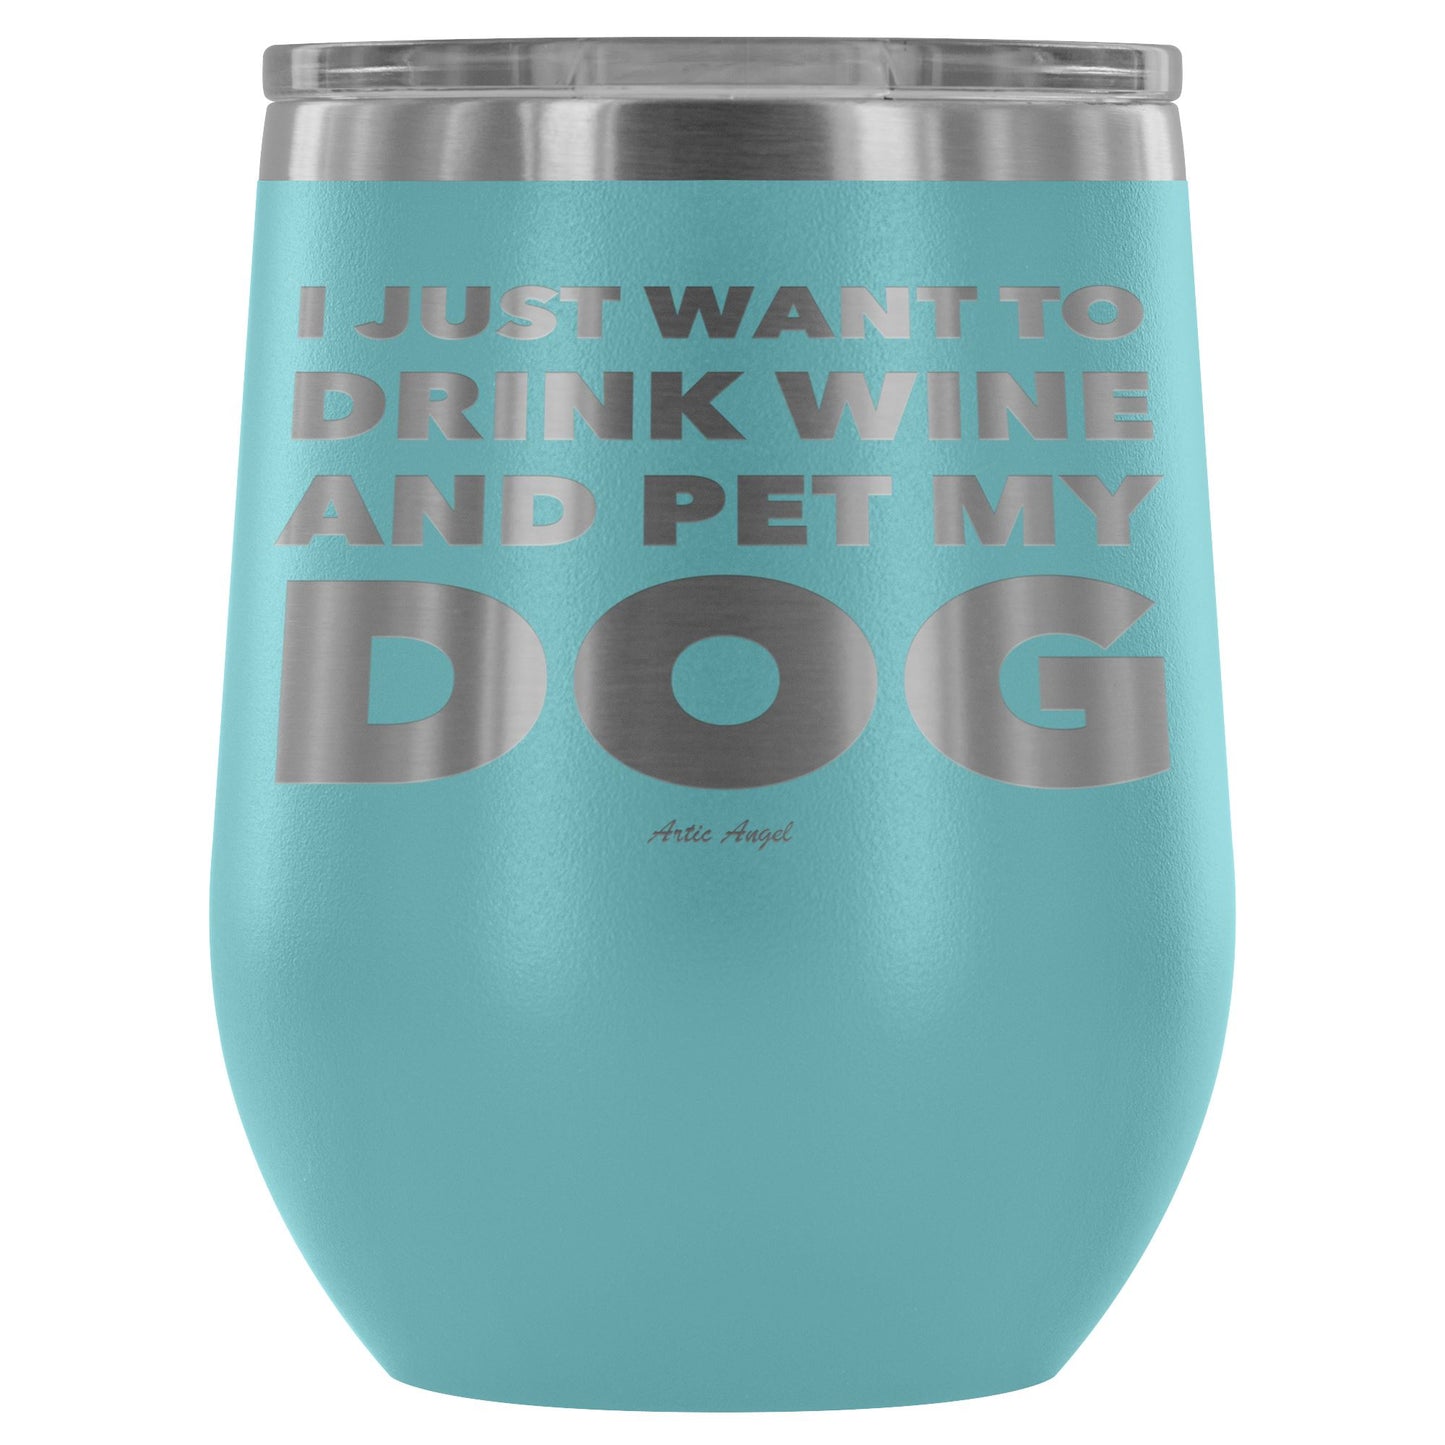 "I Just Want To Drink Wine And Pet My Dog" - Stemless Wine Cup Wine Tumbler Light Blue 